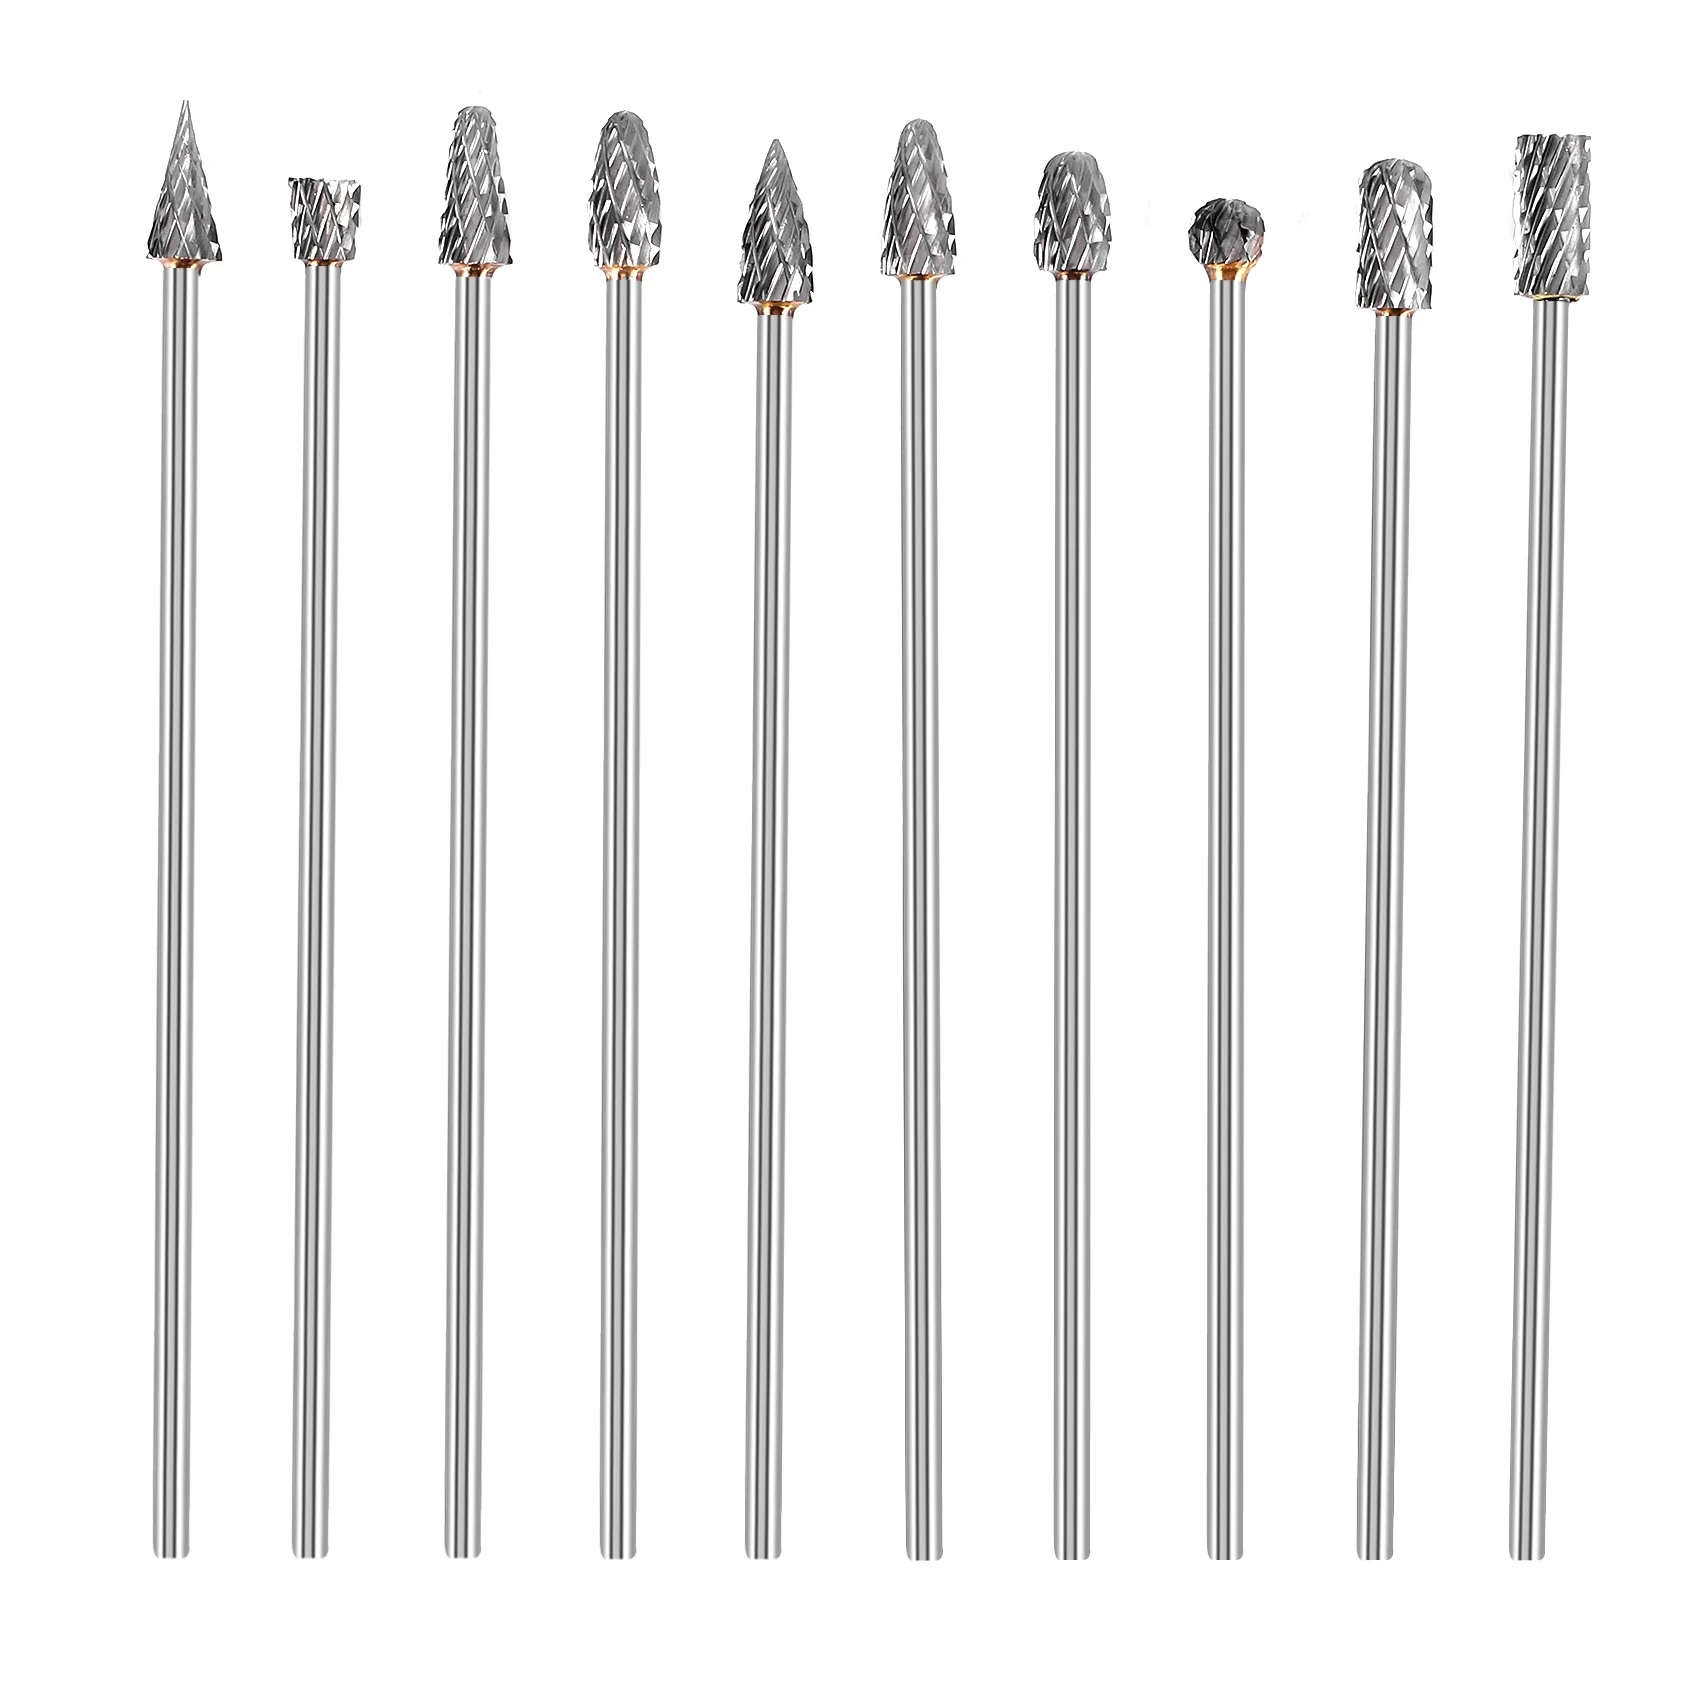 

10Pc 4 Inch Long Double Cut Tungsten Solid Carbide Rotary Burrs Set 1/8 Inch(3mm) Shank Twist Drill Bit for Rotary